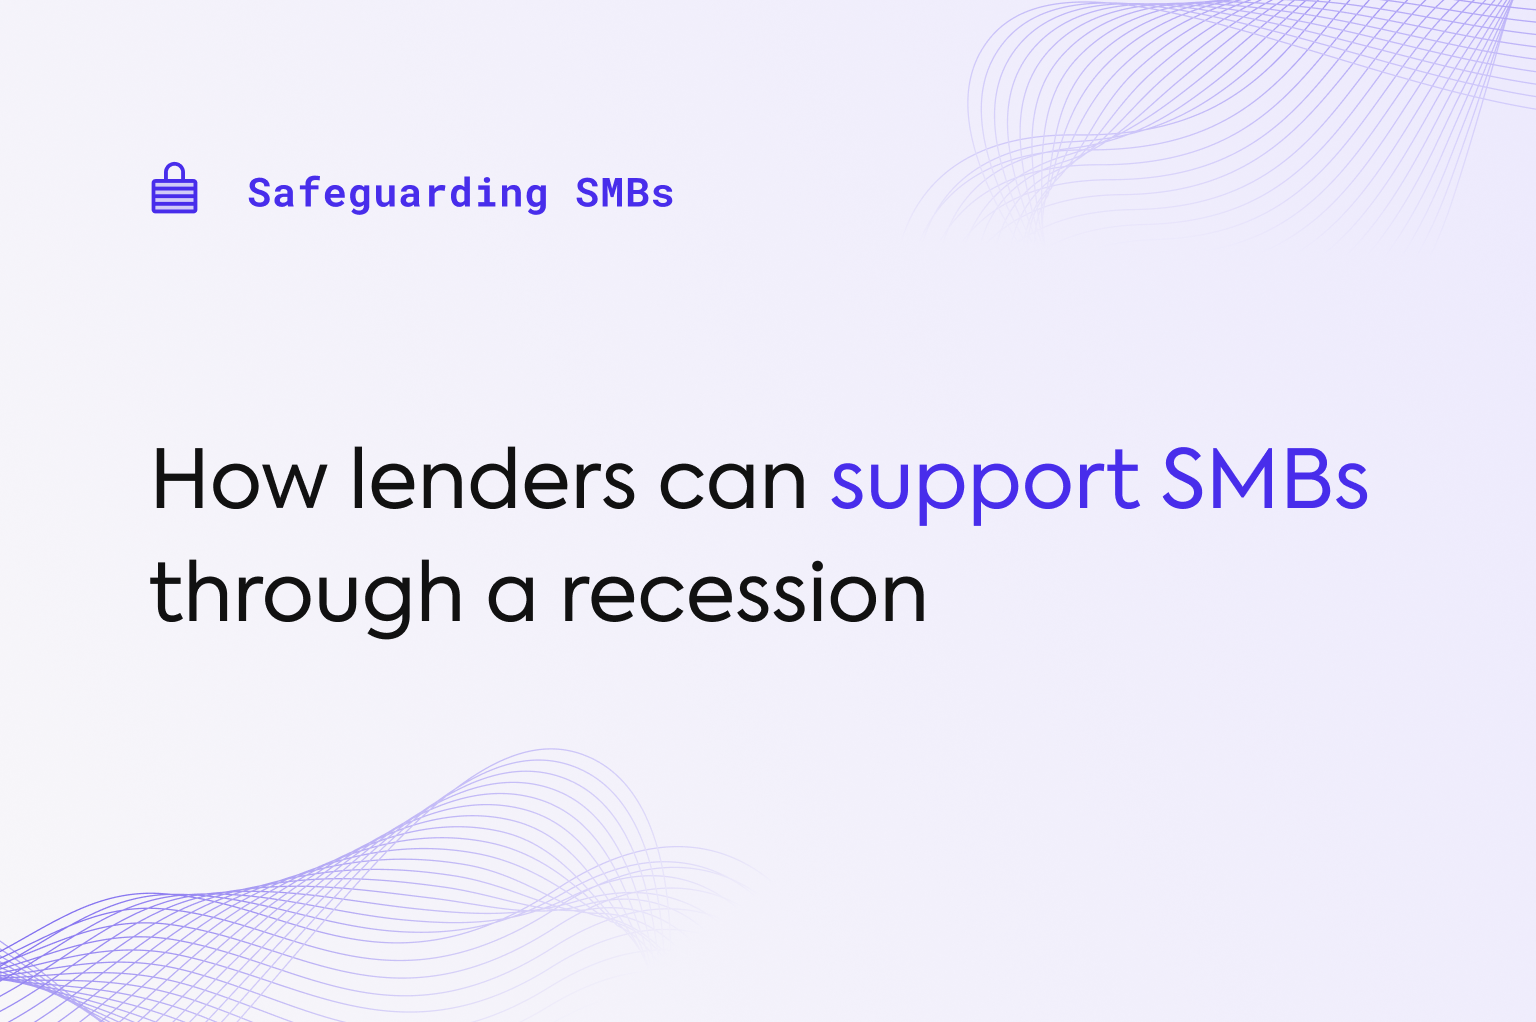 How lenders can support SMBs through a recession